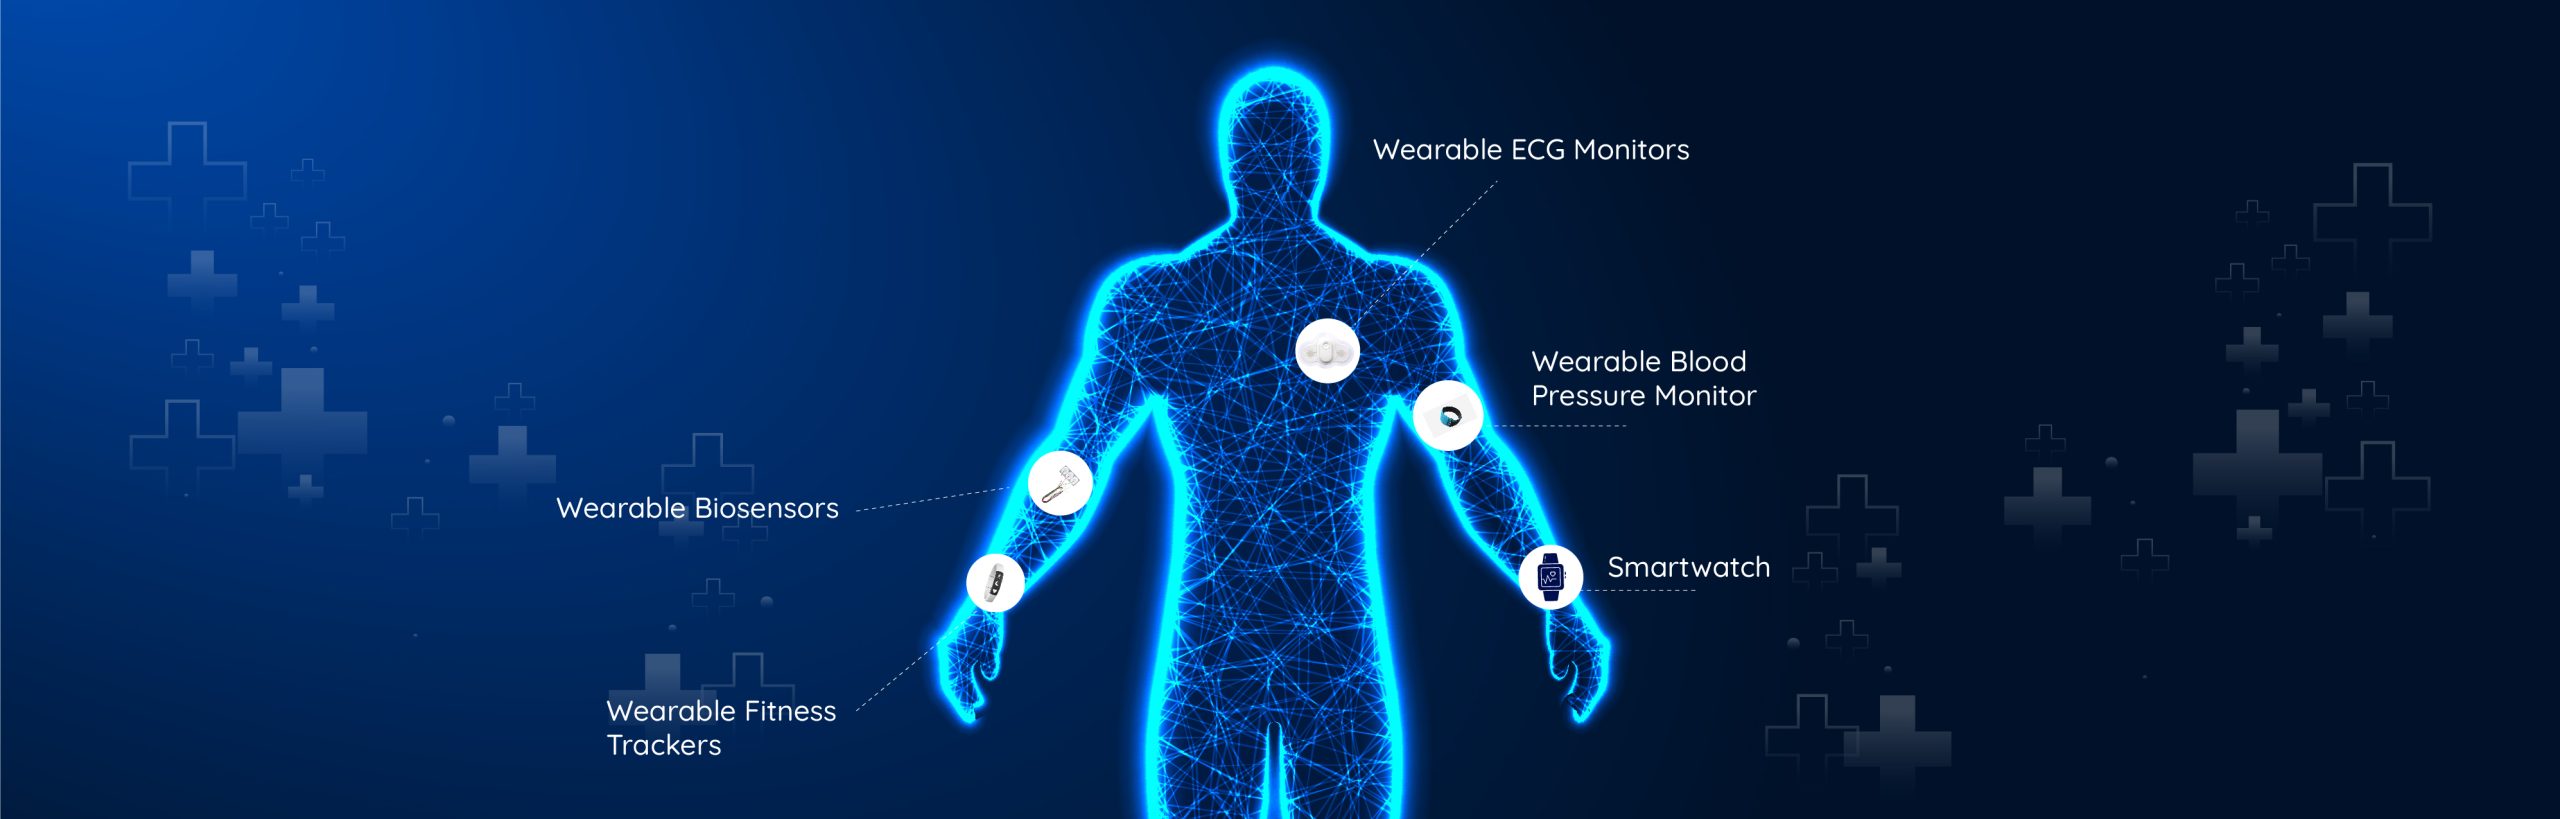 Top Wearable Technology Trends in Healthcare